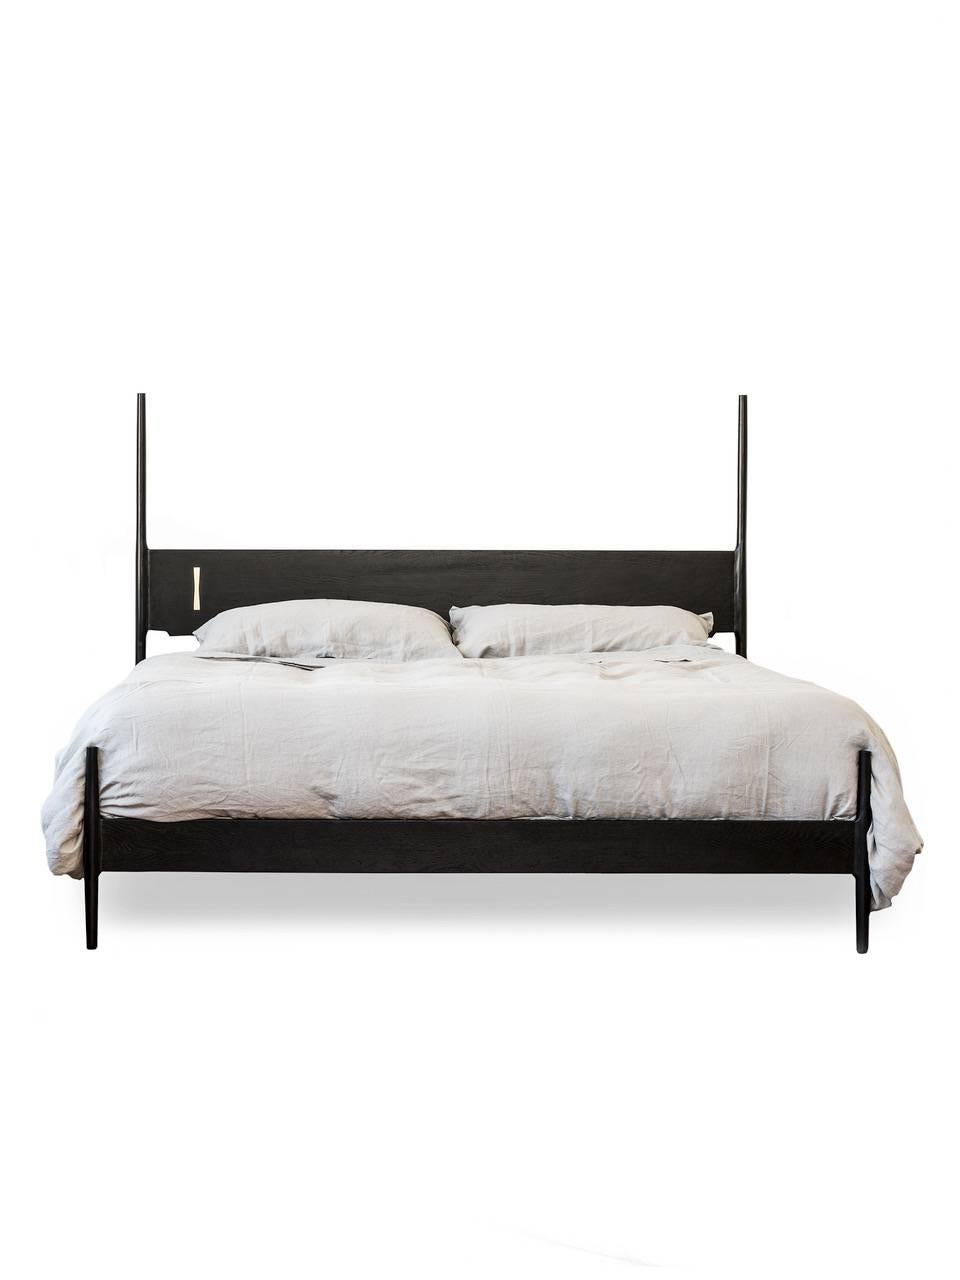 Posted bed with solid wood construction, hand-cut joinery and custom Dutchman brass joint. Handmade in Los Angeles, California.  

Bed frame available in an Eastern Standard King, Super King, Cal King or Queen. 

As shown in ebonized oak with brass